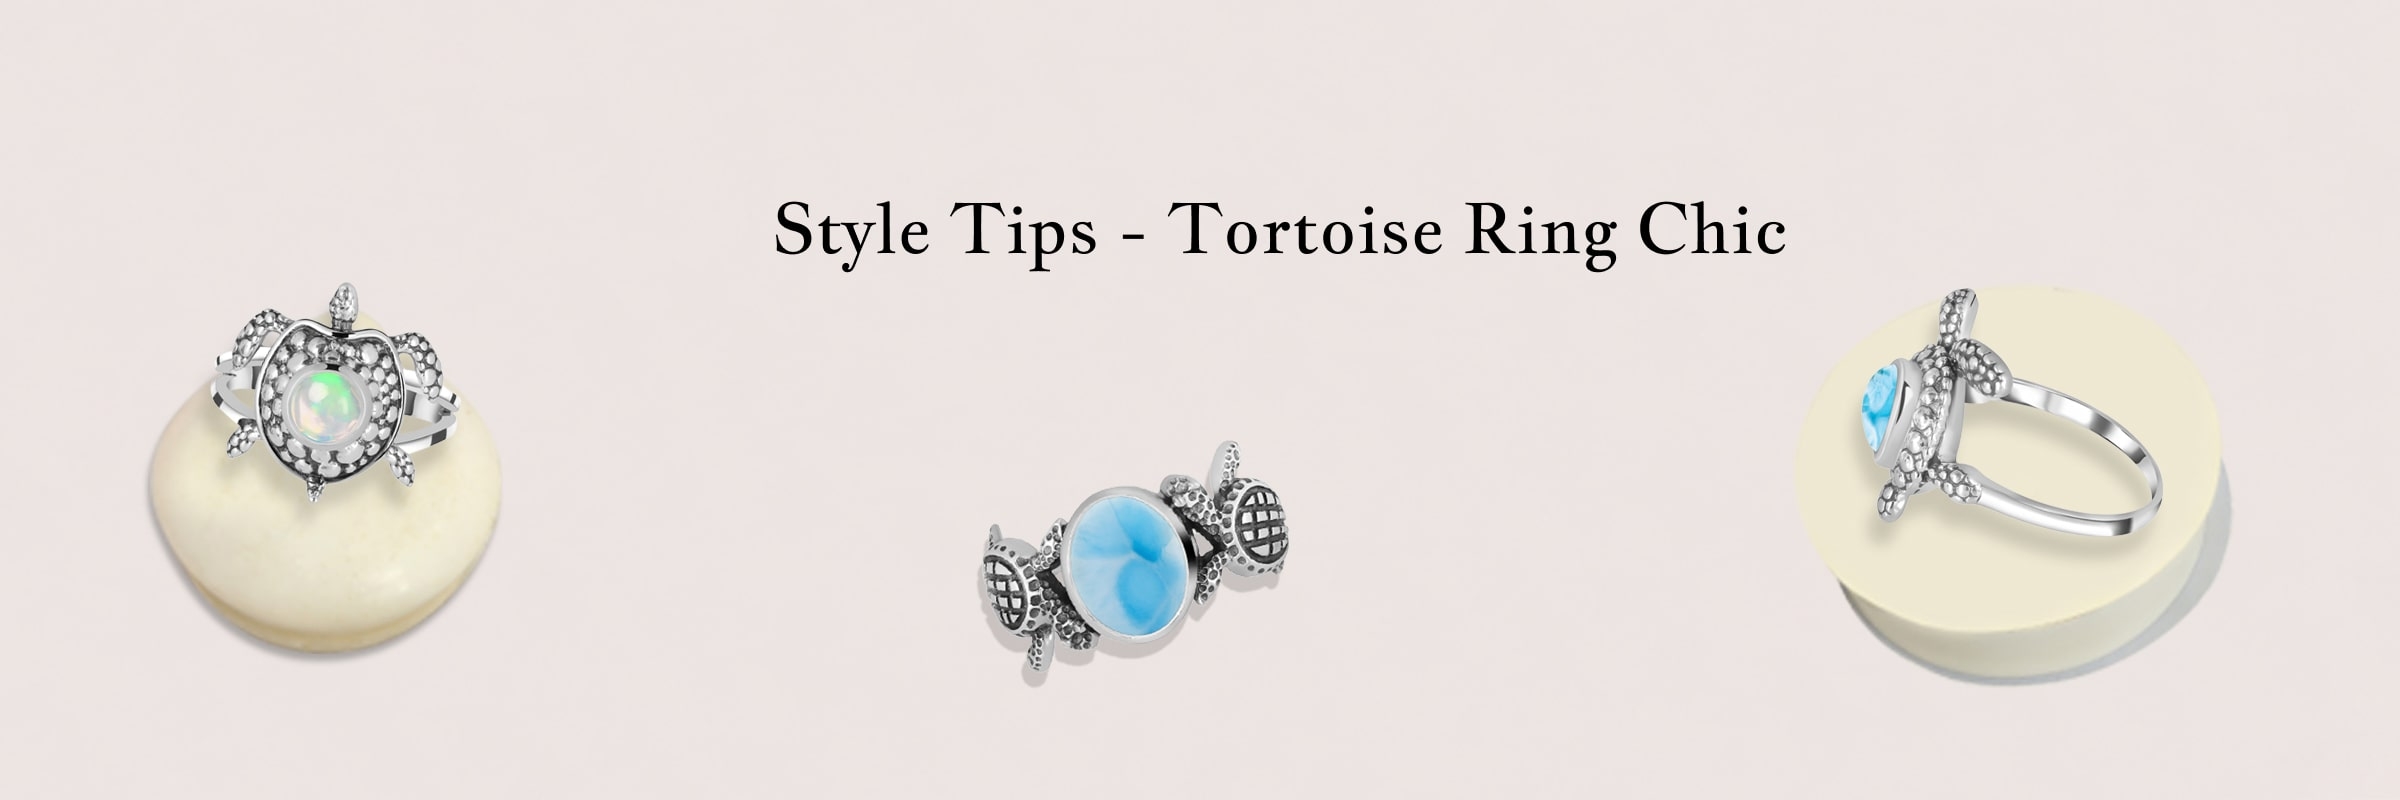 For Men ] - Lucky Tortoise Ring is considered to bring good luck to the  wearer according to the Vastu Shastra and Feng Shui philosophy.The shape of  the... | By Express Deals NepalFacebook